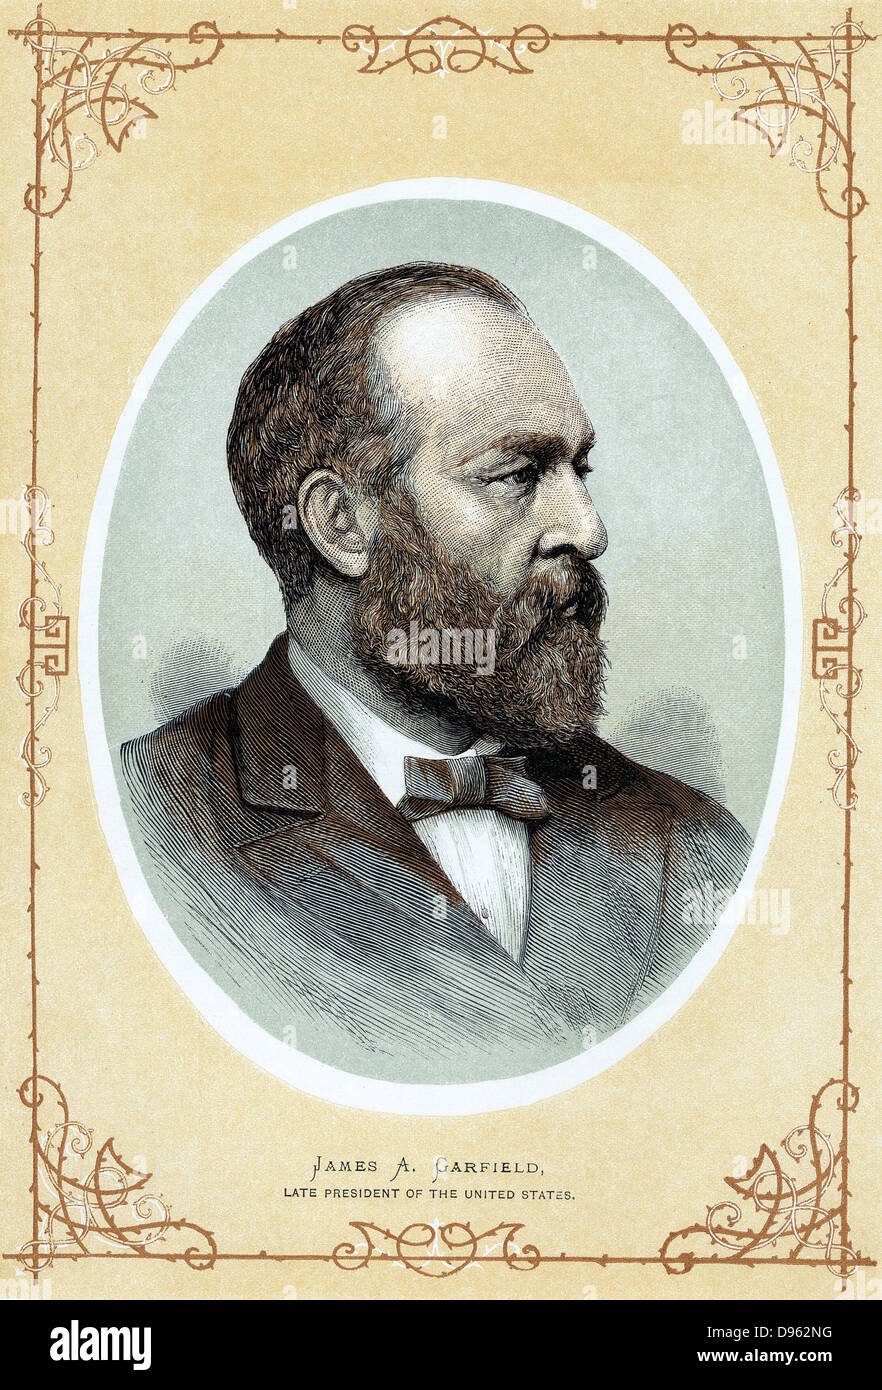 New Photo: James A Garfield 6 Sizes! 20th President of the United States 